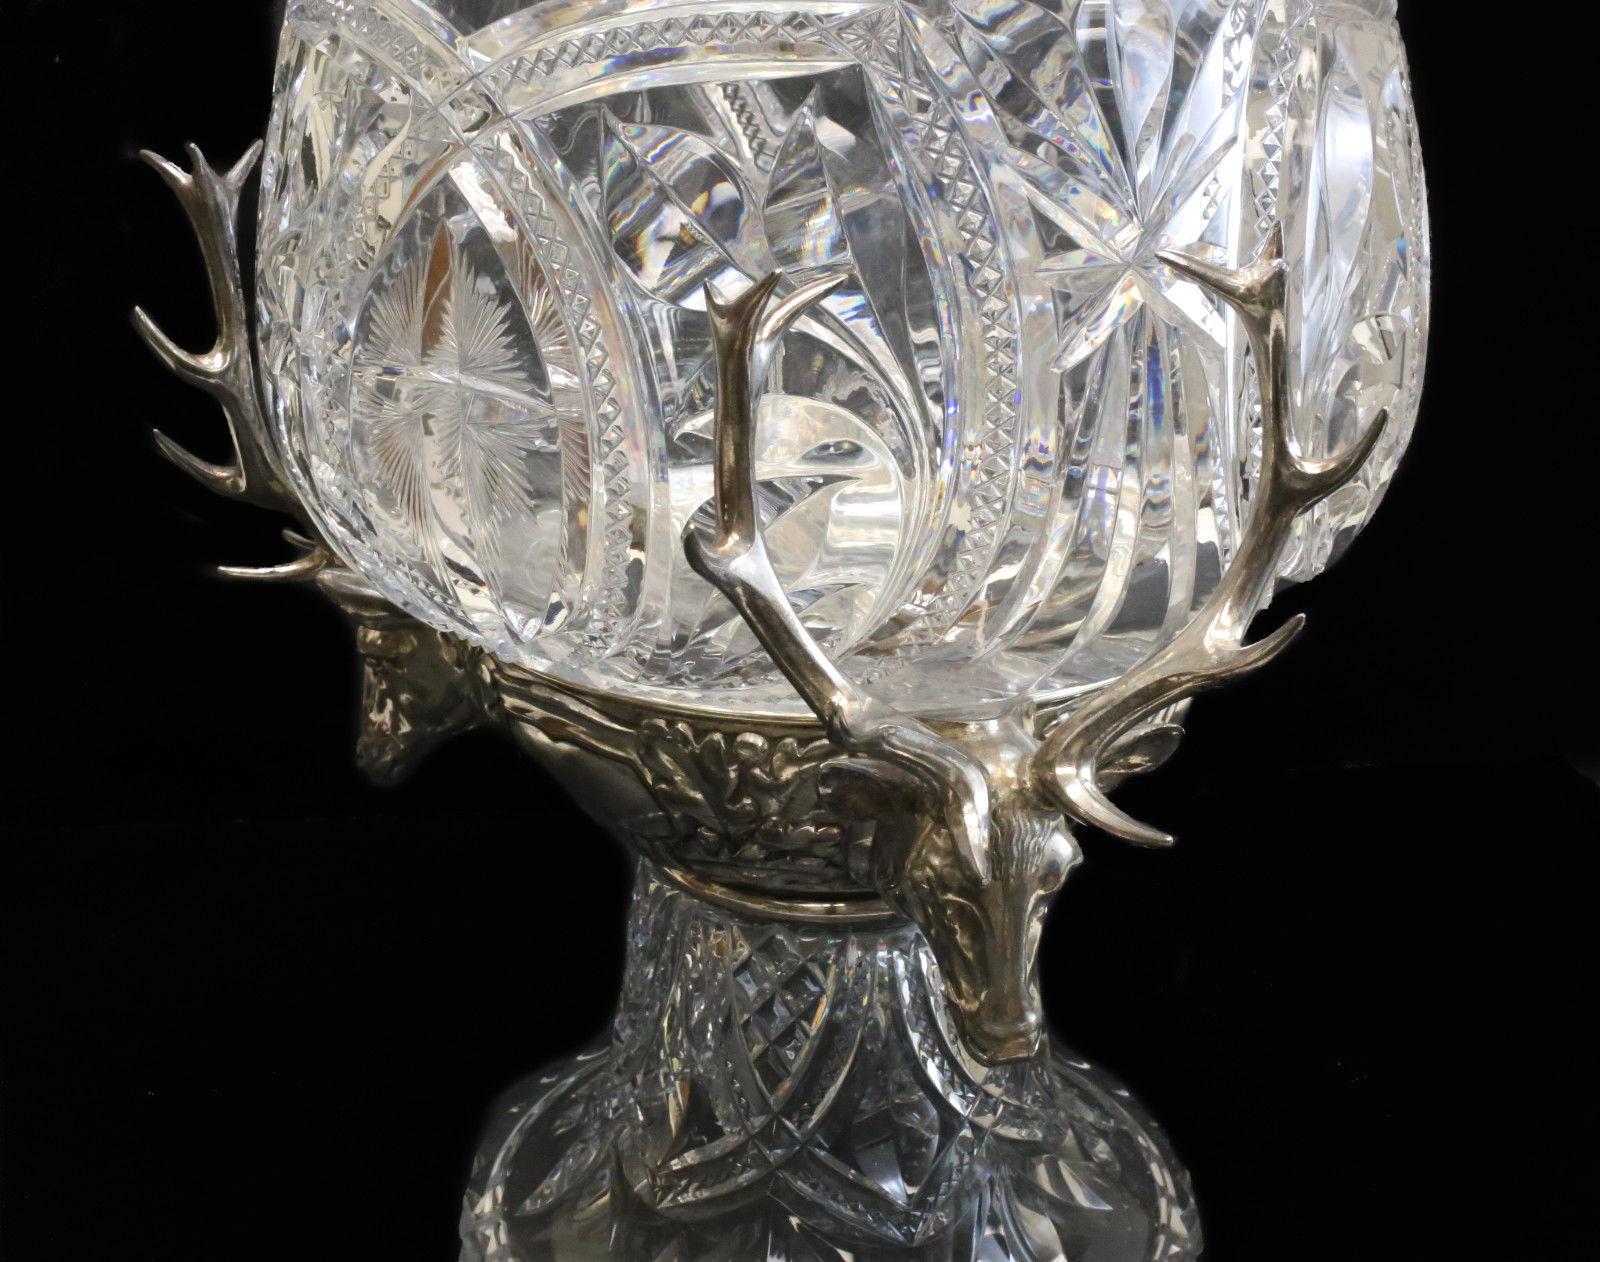 WMF Anamalier Brilliant Cut Glass & Silver Plate Centerpiece Bowl, Stags In Good Condition For Sale In Pasadena, CA